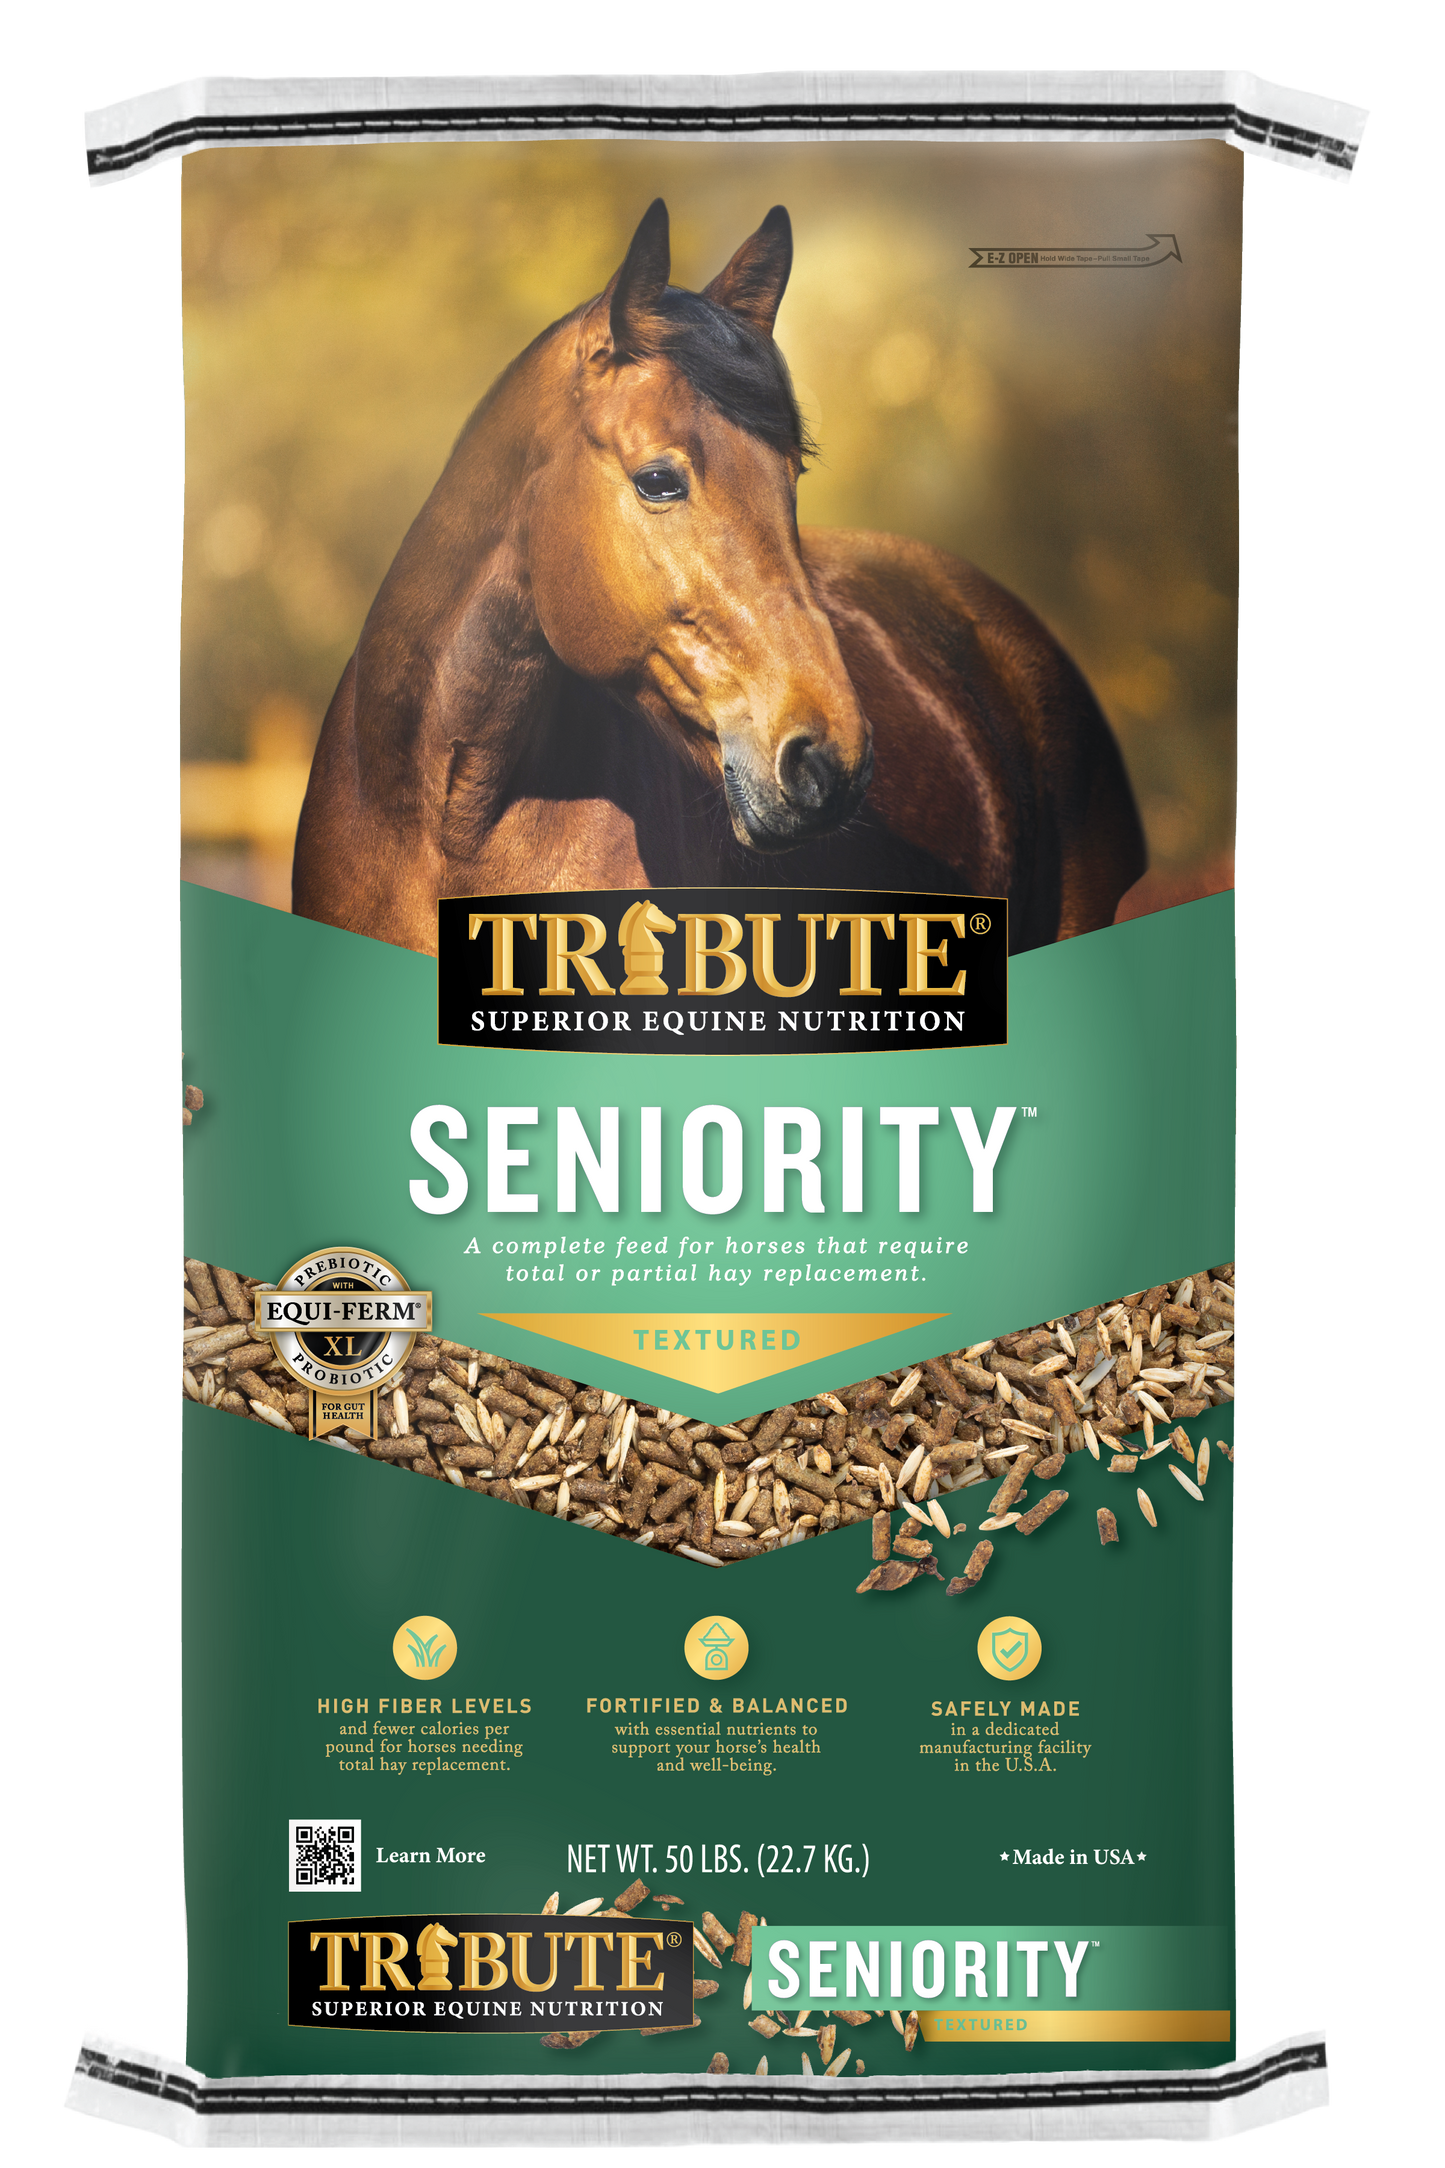 Seniority® Textured, Hay Replacement Feed